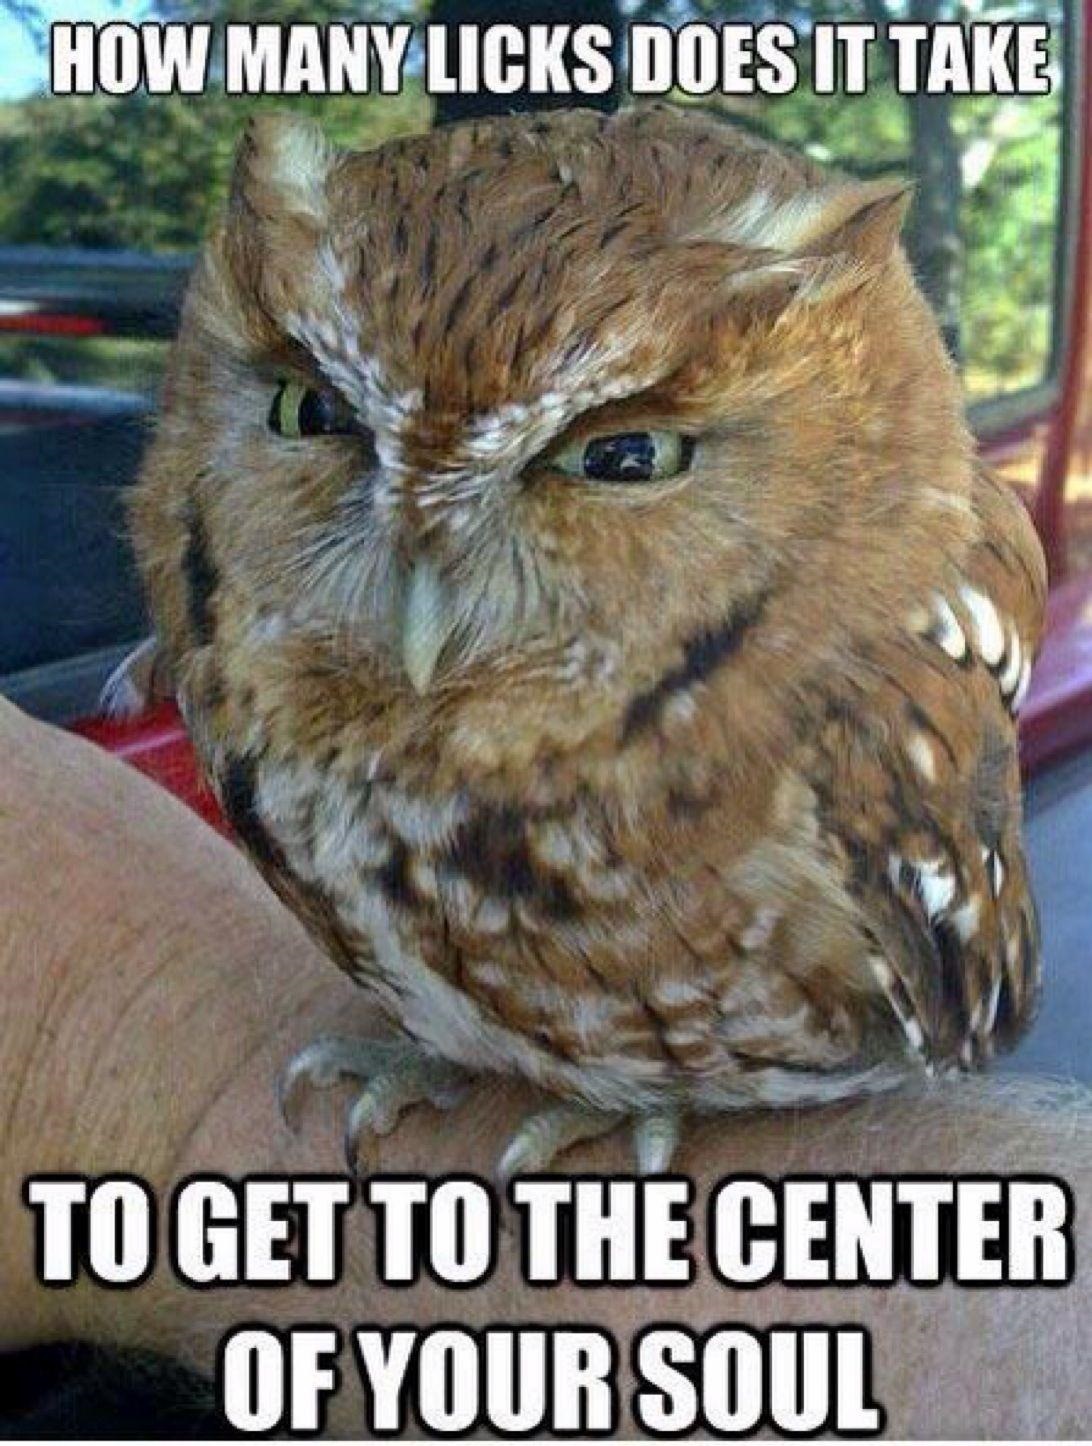 evil owl meme - How Many Licks Does It Take To Get To The Center Of Your Soul